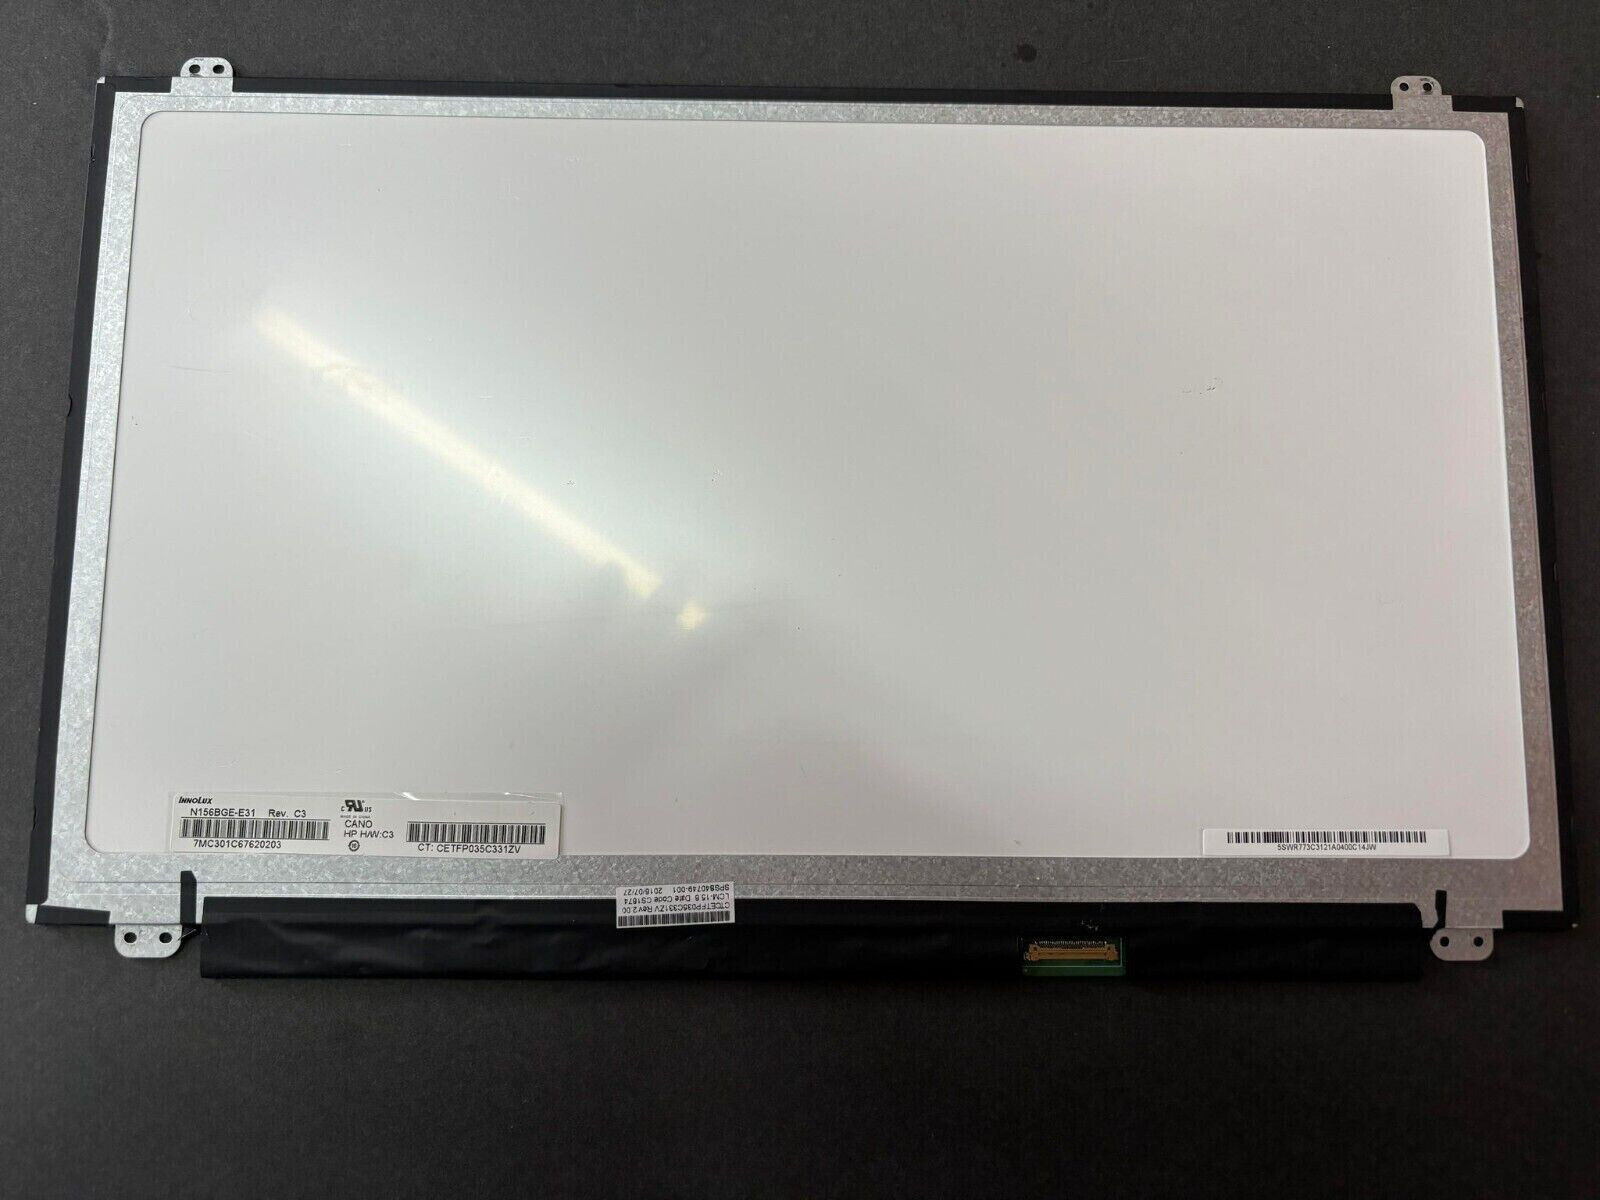 Primary image for Innolux N156bge-e31 Rev. C3 15.6" Replacement LCD Panel for HP ProBook 650 G2